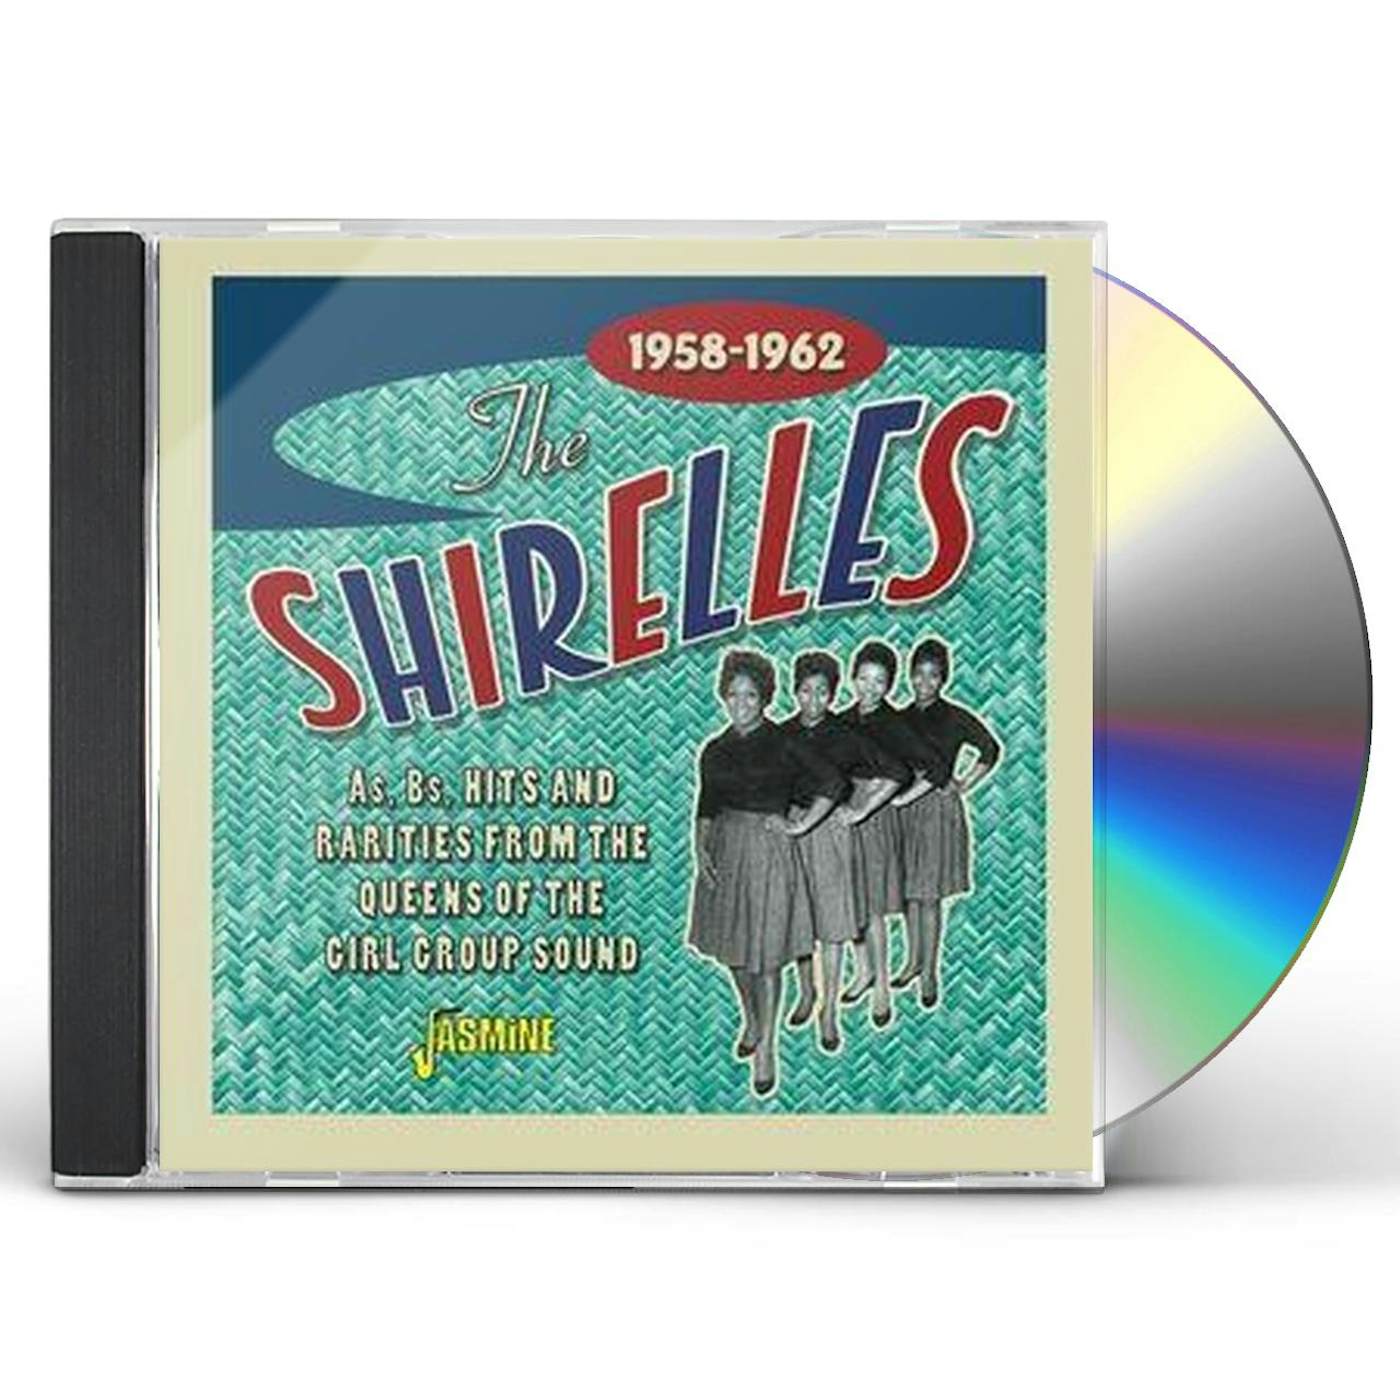 The Shirelles AS BS HITS & RARITIES FROM QUEENS OF GIRL GROUP CD